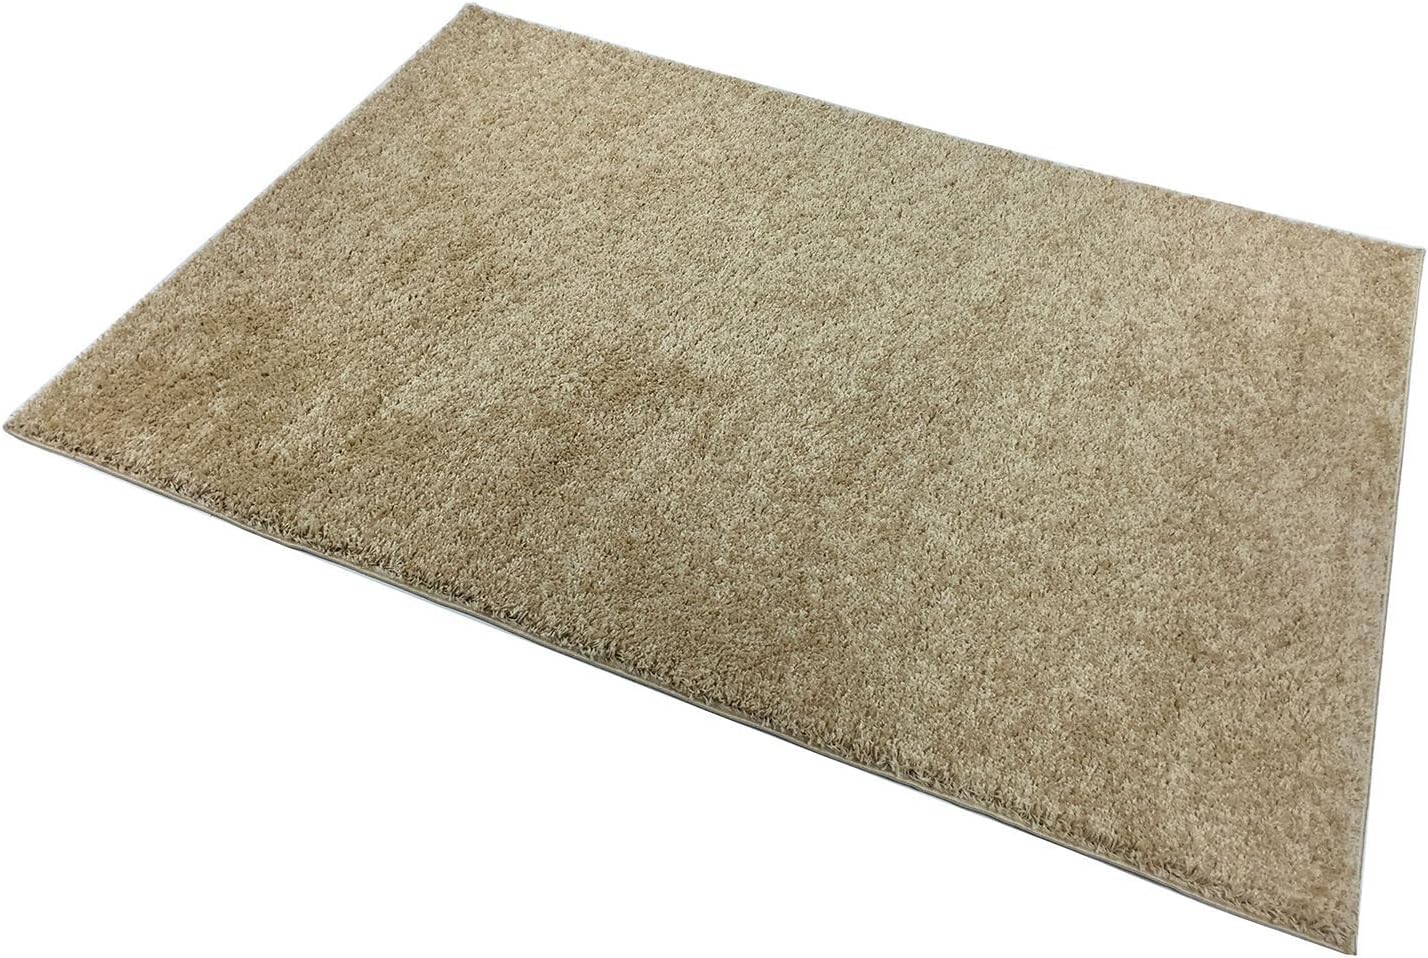 SOHO Shaggy Collection Solid Color Shag Area Rug (Beige, 8 x 10) - 0